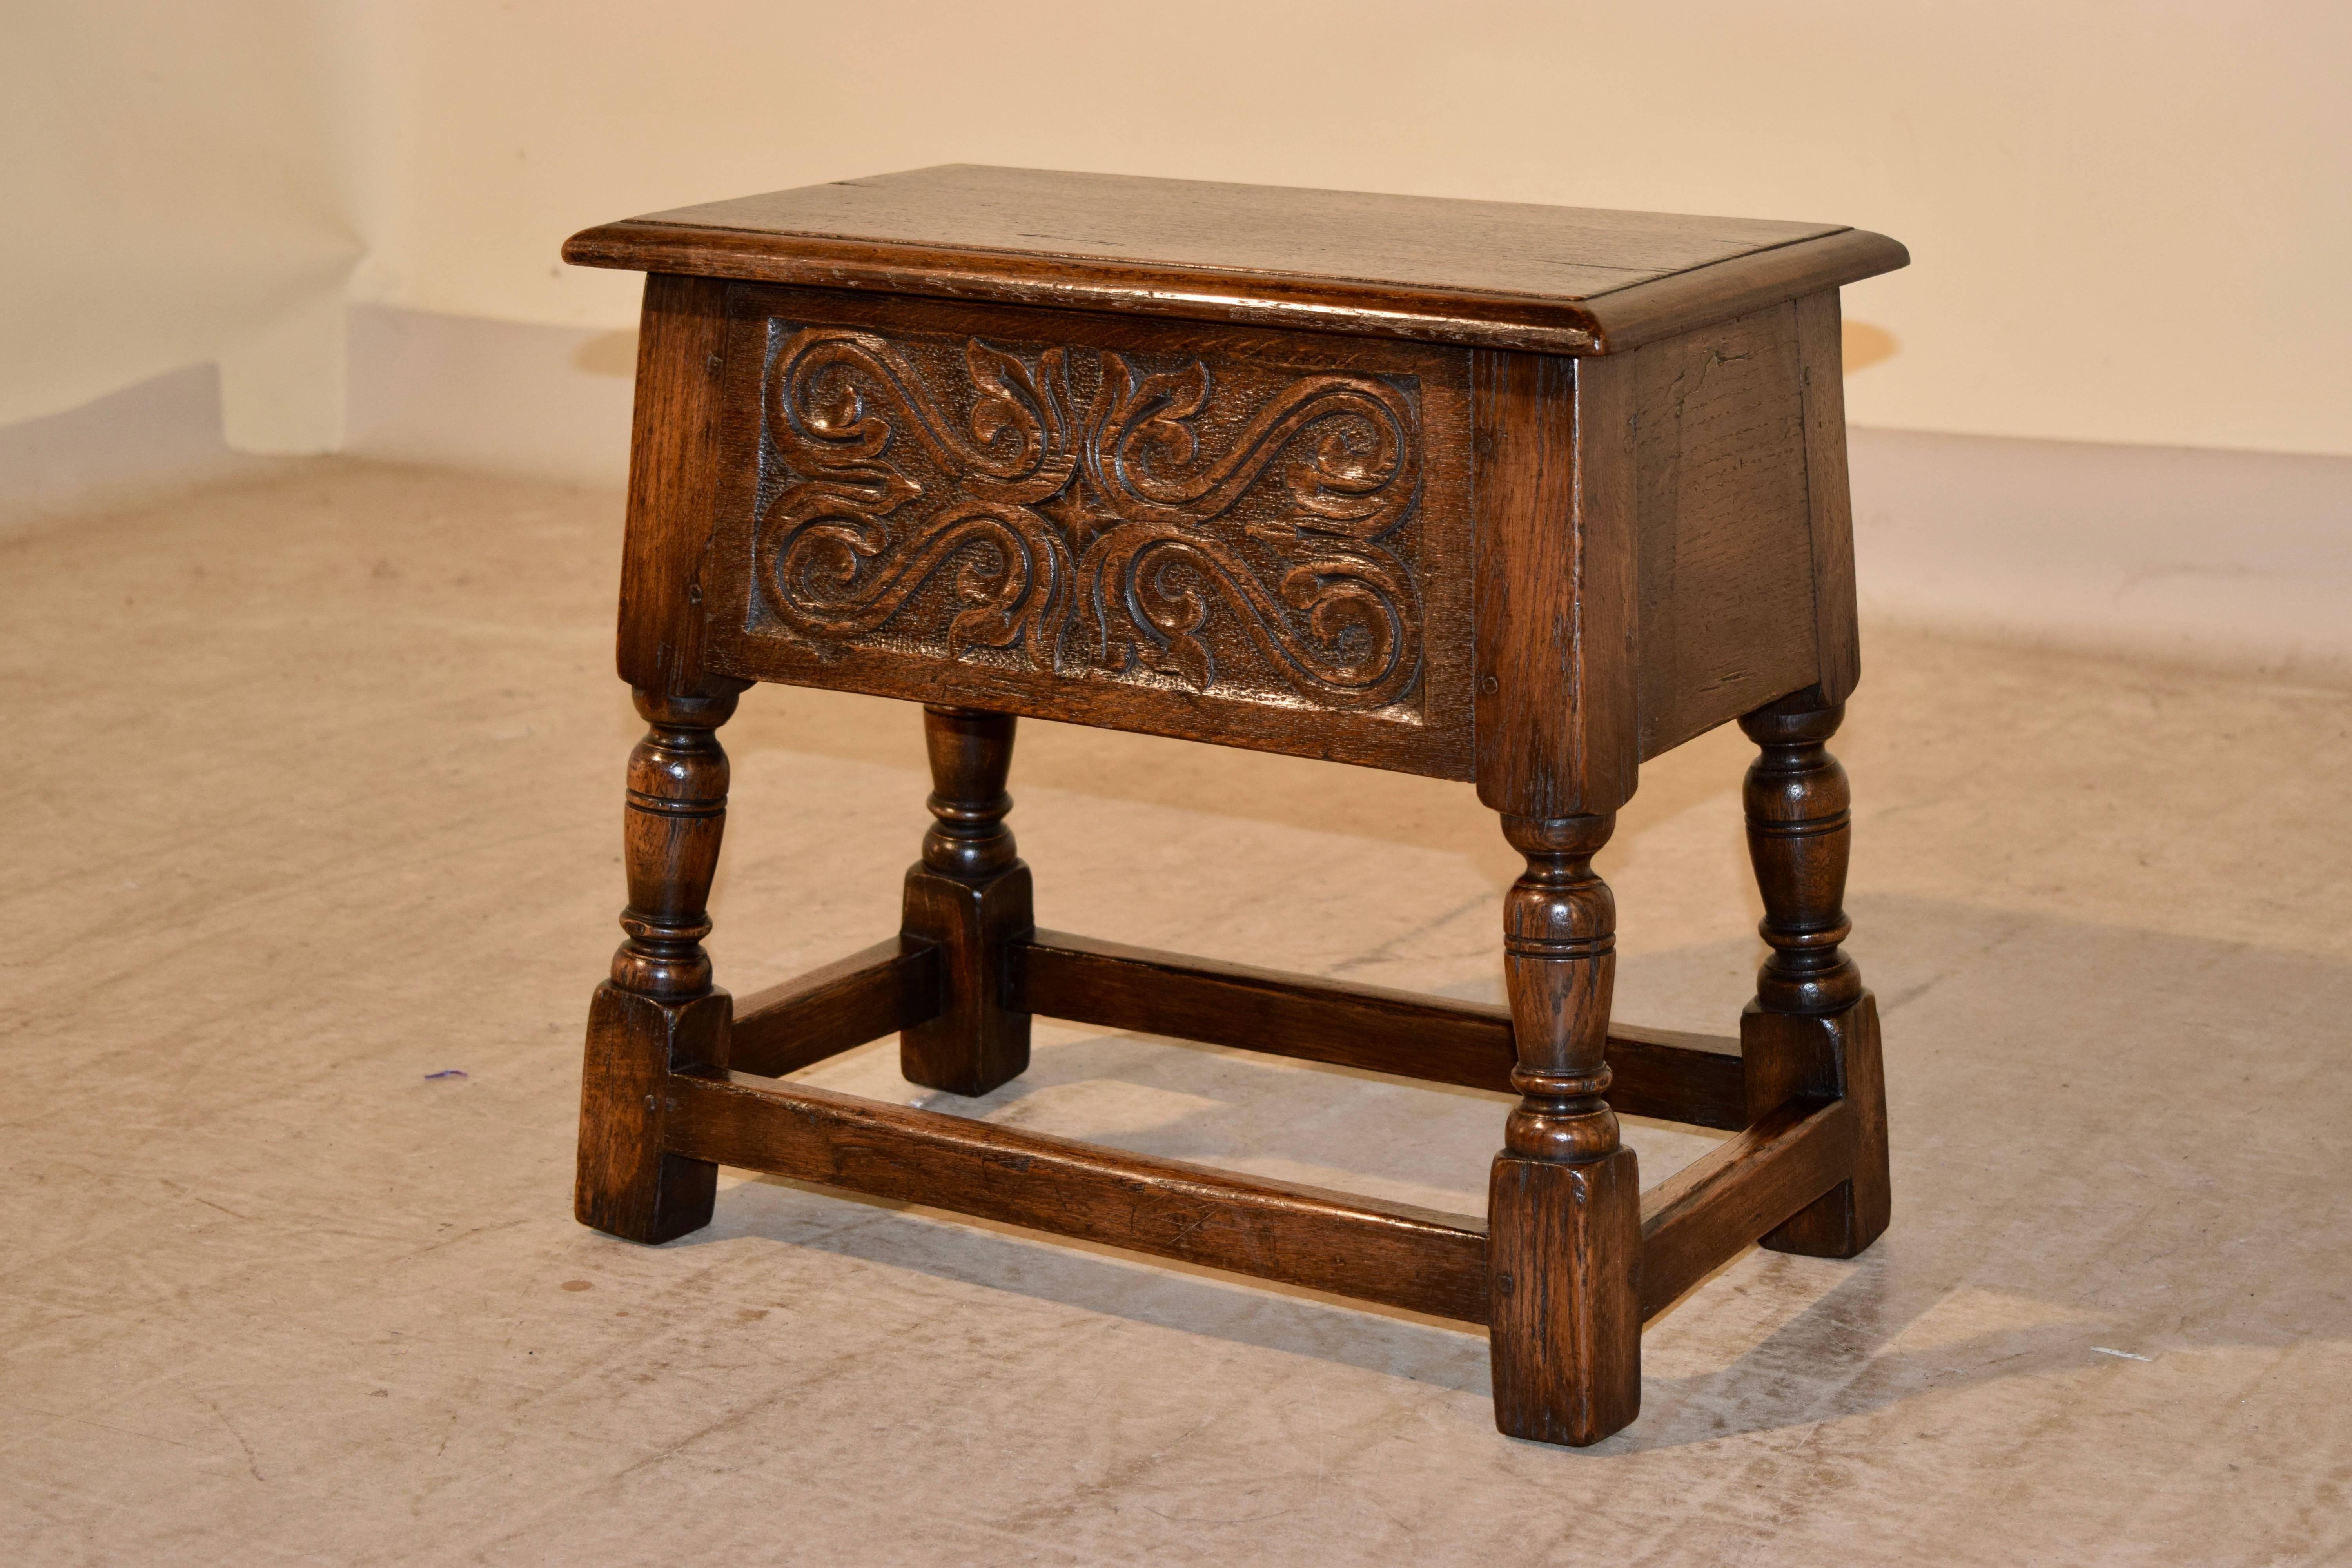 19th century oak lift-top stool from England. The top is beveled around the edge and opens to reveal storage. The front panel is hand-carved decorated, and is supported on hand-turned legs joined by stretchers. The top measures 19.88 x 12.